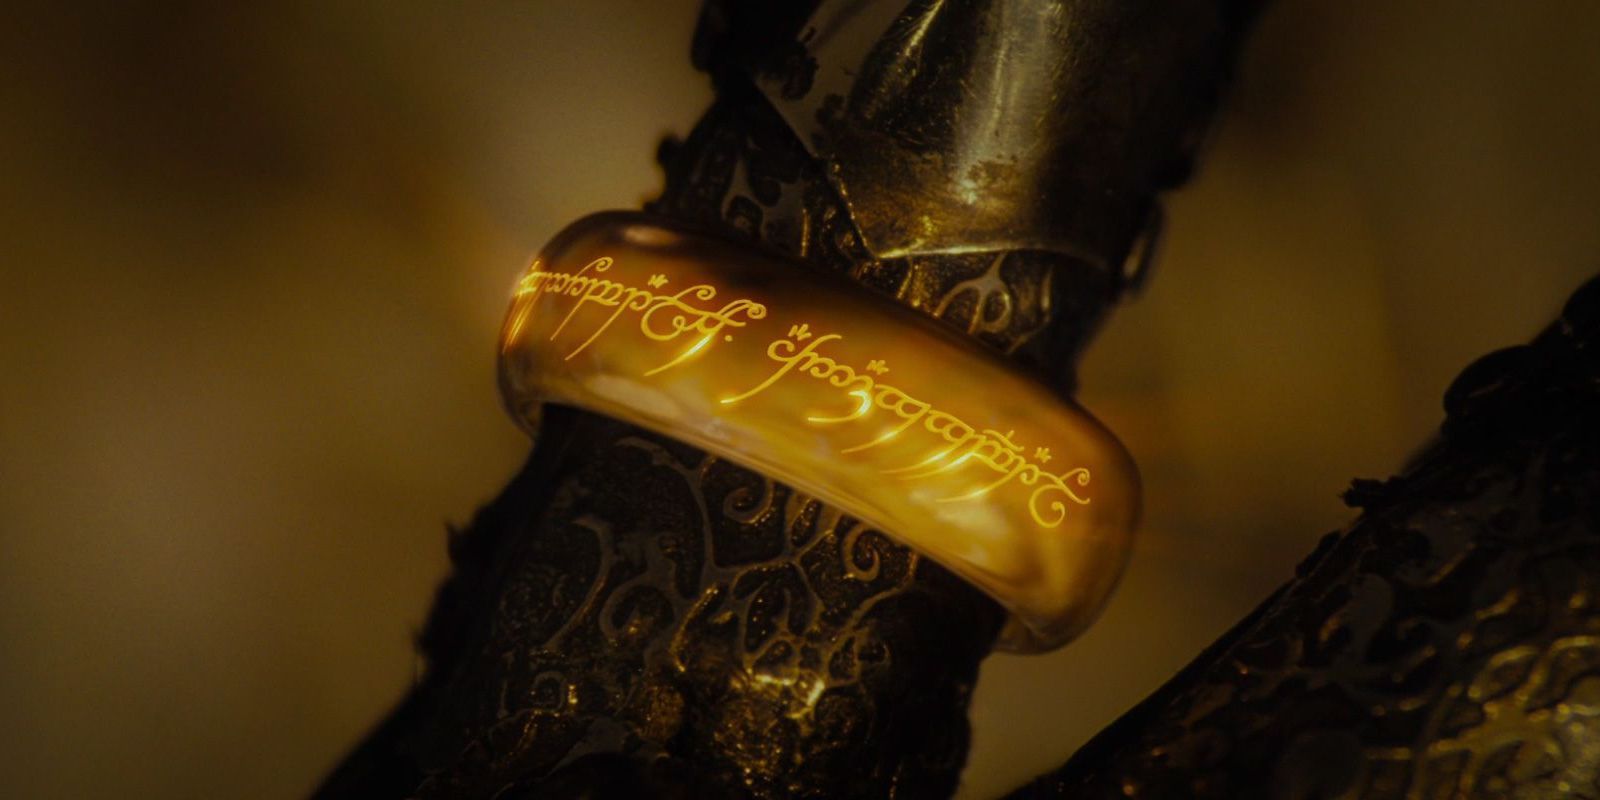 The One Ring seen on Sauron's finger in Lord of the Rings